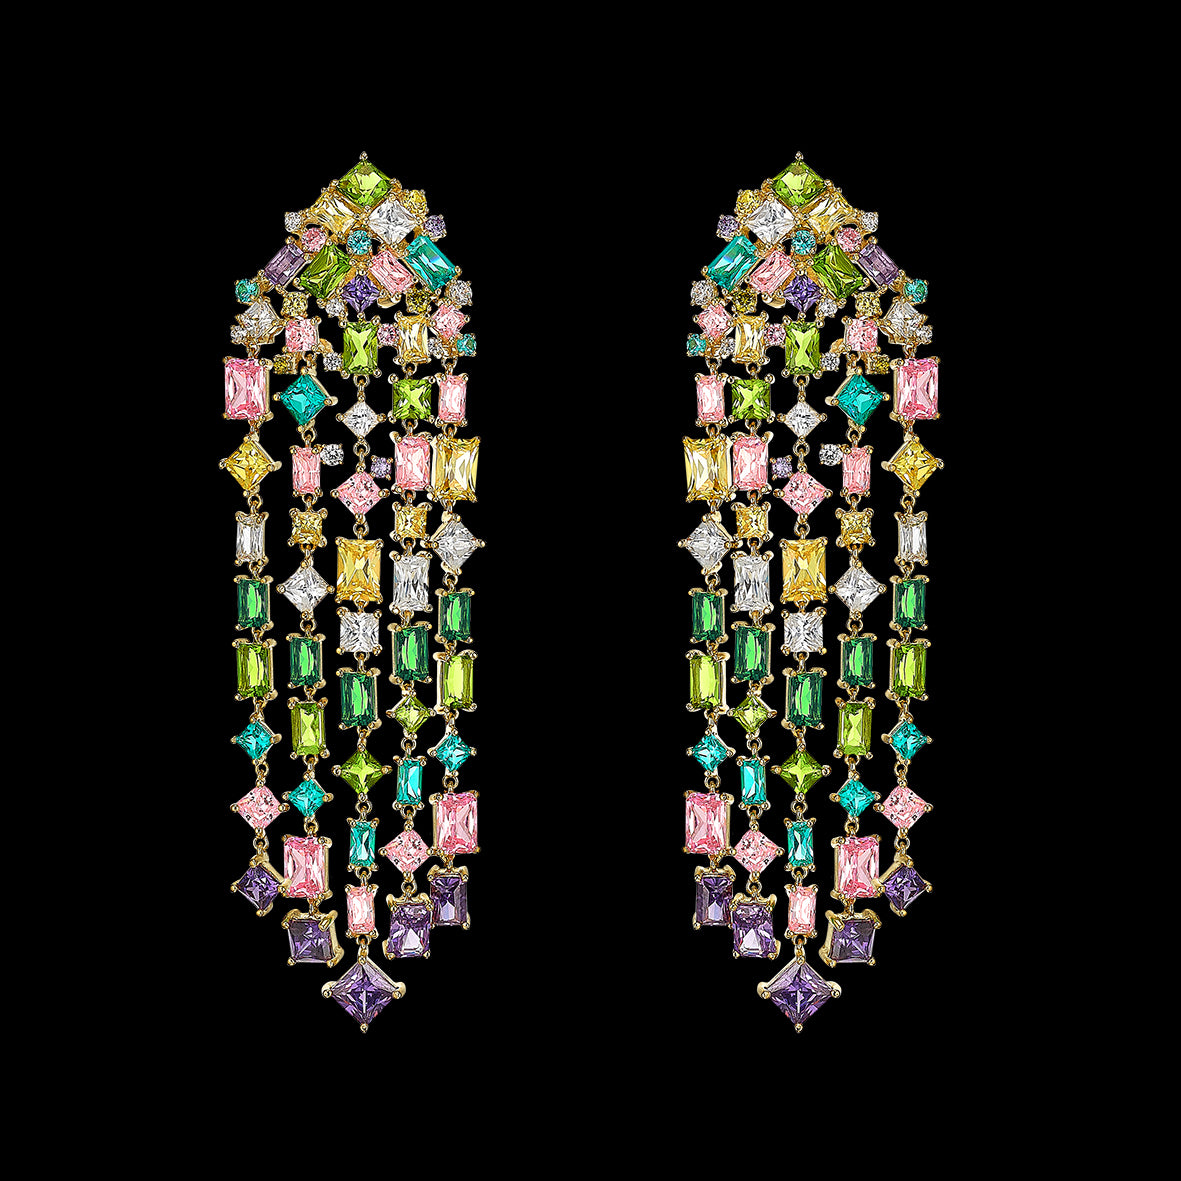 Rainbow Cascade Long Earrings, Earrings, Anabela Chan Joaillerie - Fine jewelry with laboratory grown and created gemstones hand-crafted in the United Kingdom. Anabela Chan Joaillerie is the first fine jewellery brand in the world to champion laboratory-grown and created gemstones with high jewellery design, artisanal craftsmanship and a focus on ethical and sustainable innovations.